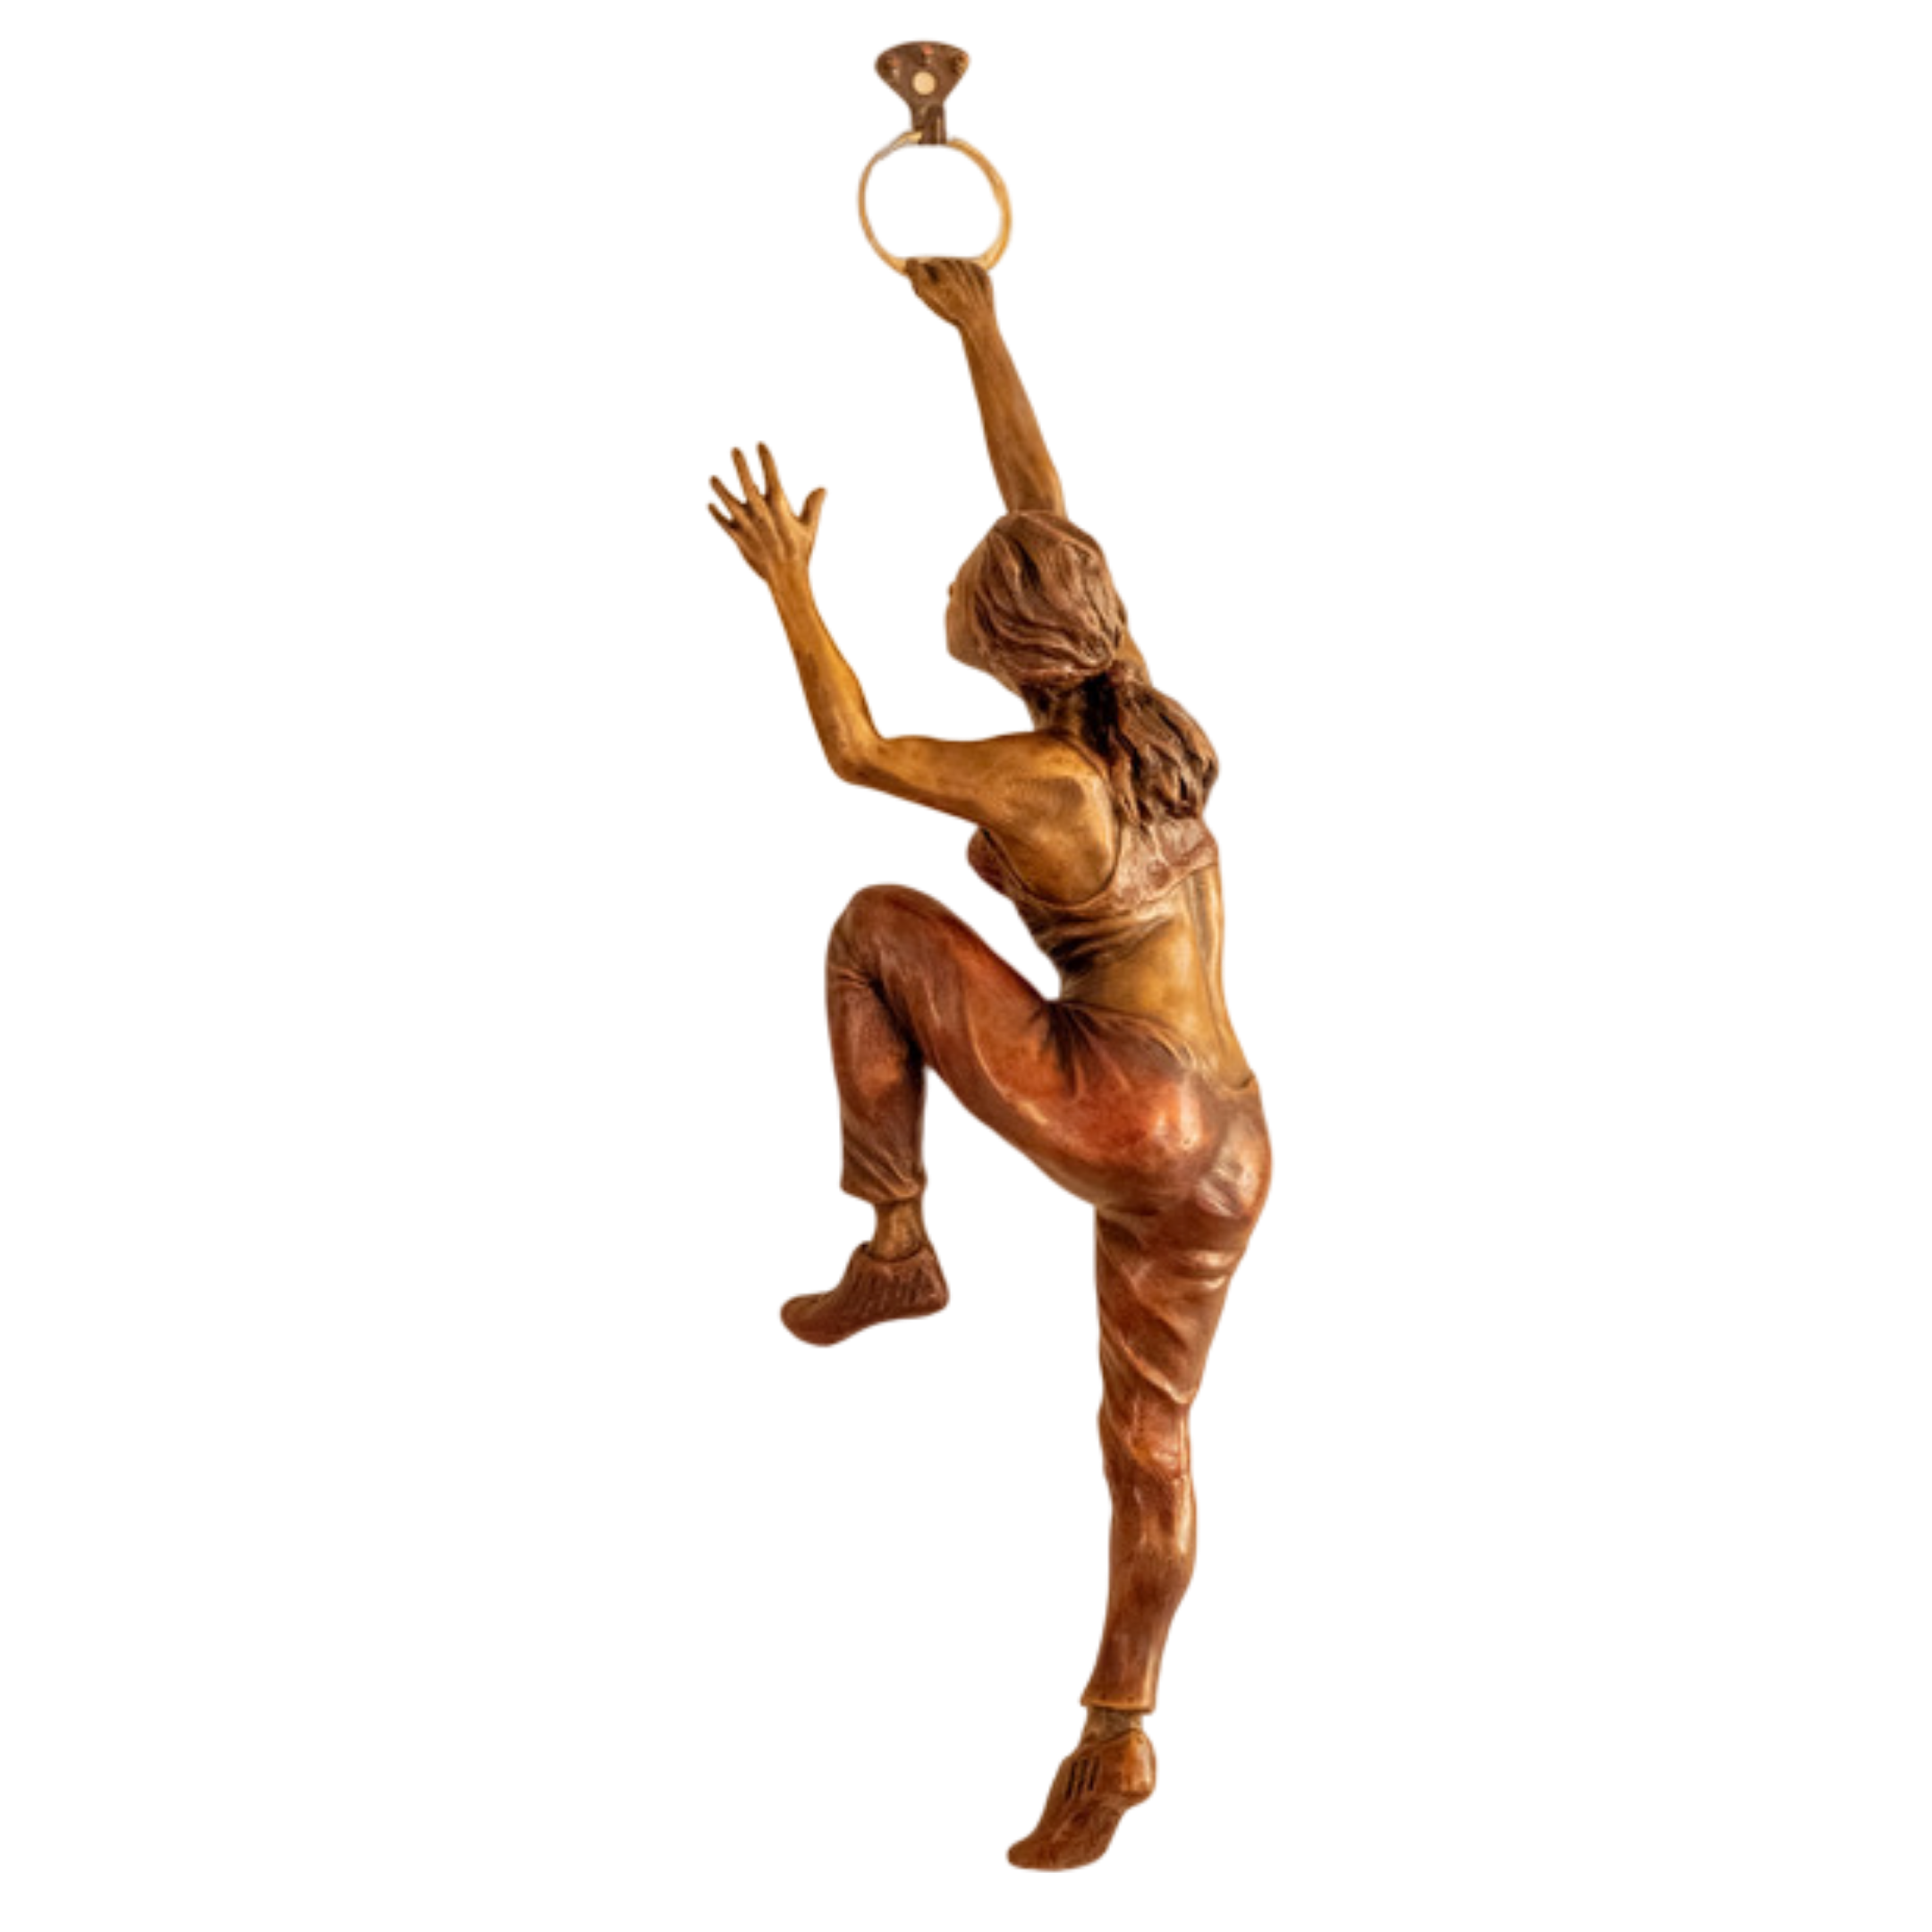 Lance glasser   nevertheless she persisted transparent background   evo art maui front street lahaina sculpture climber woman female hawaii lc2h3w